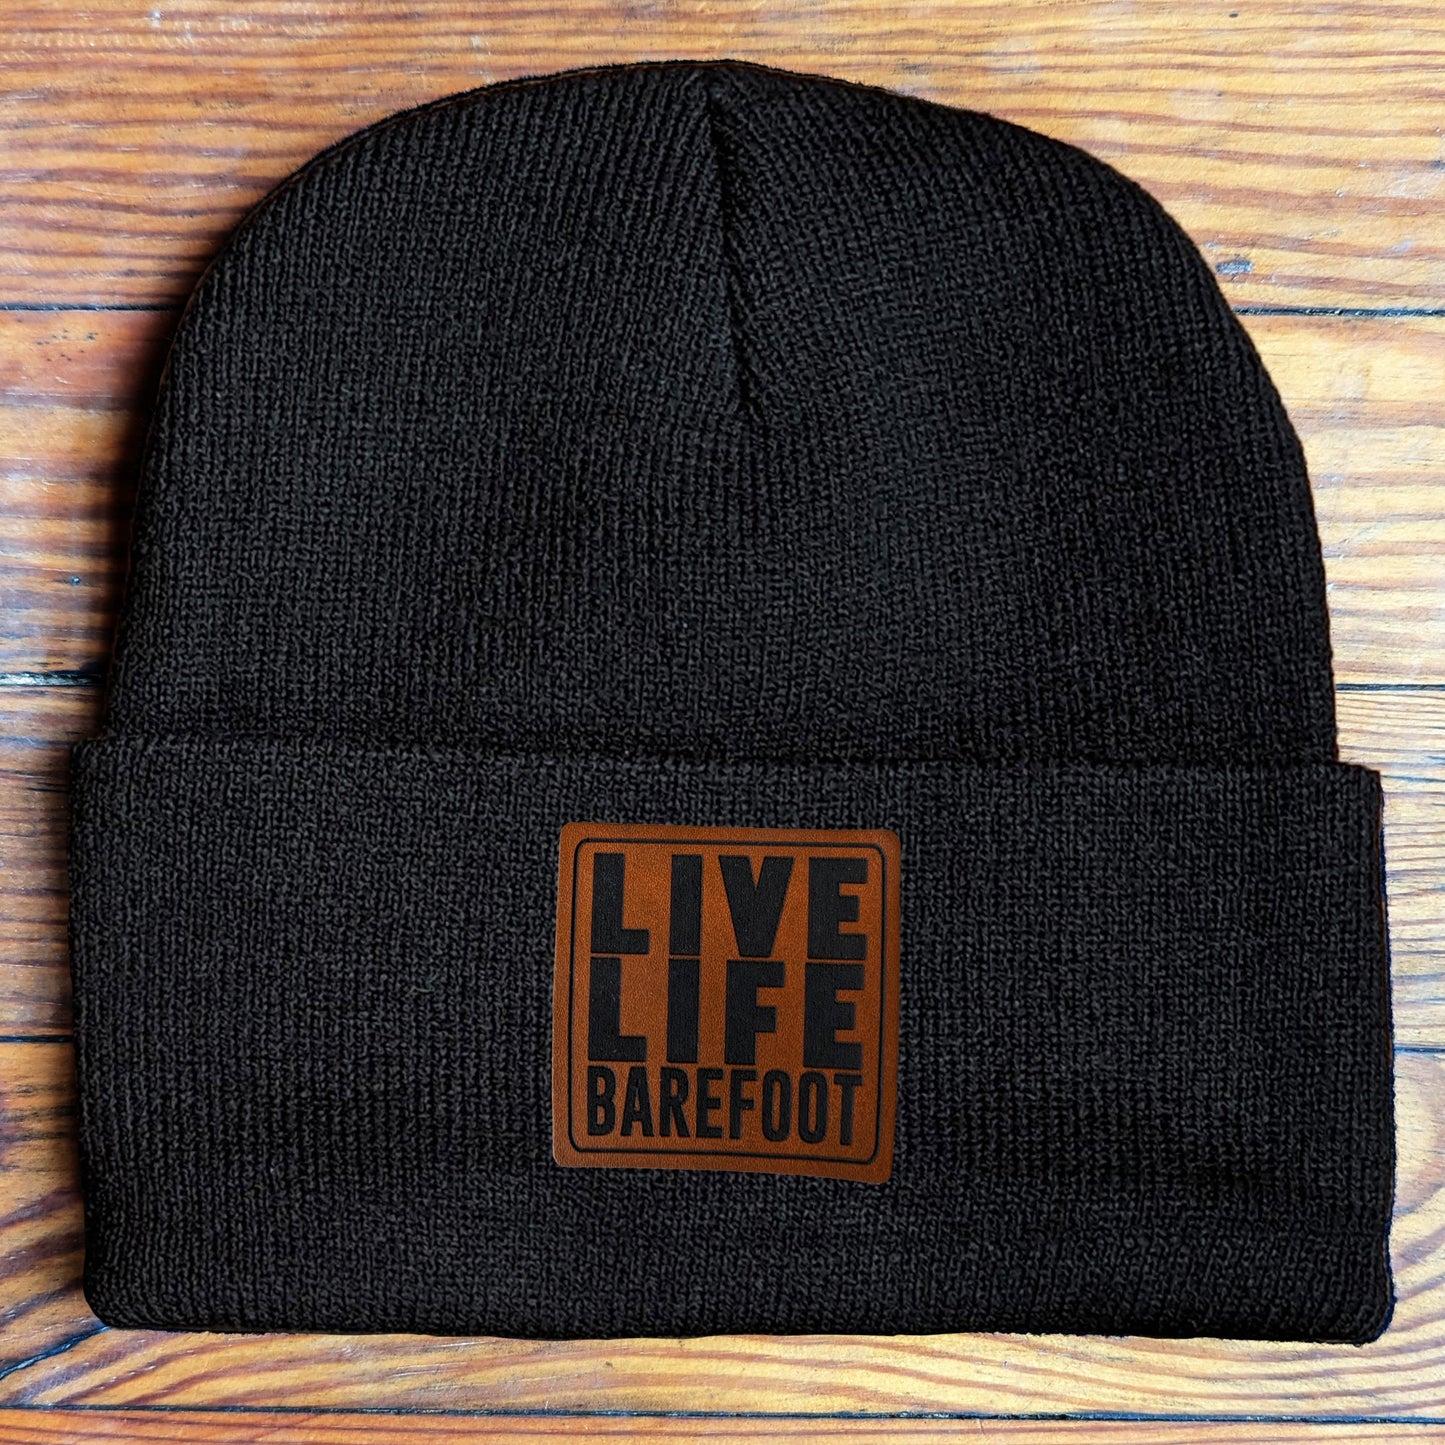 "Live Life Barefoot" Country Kid Rural Living Beanie | One Size Fits All | FOUR Color Options